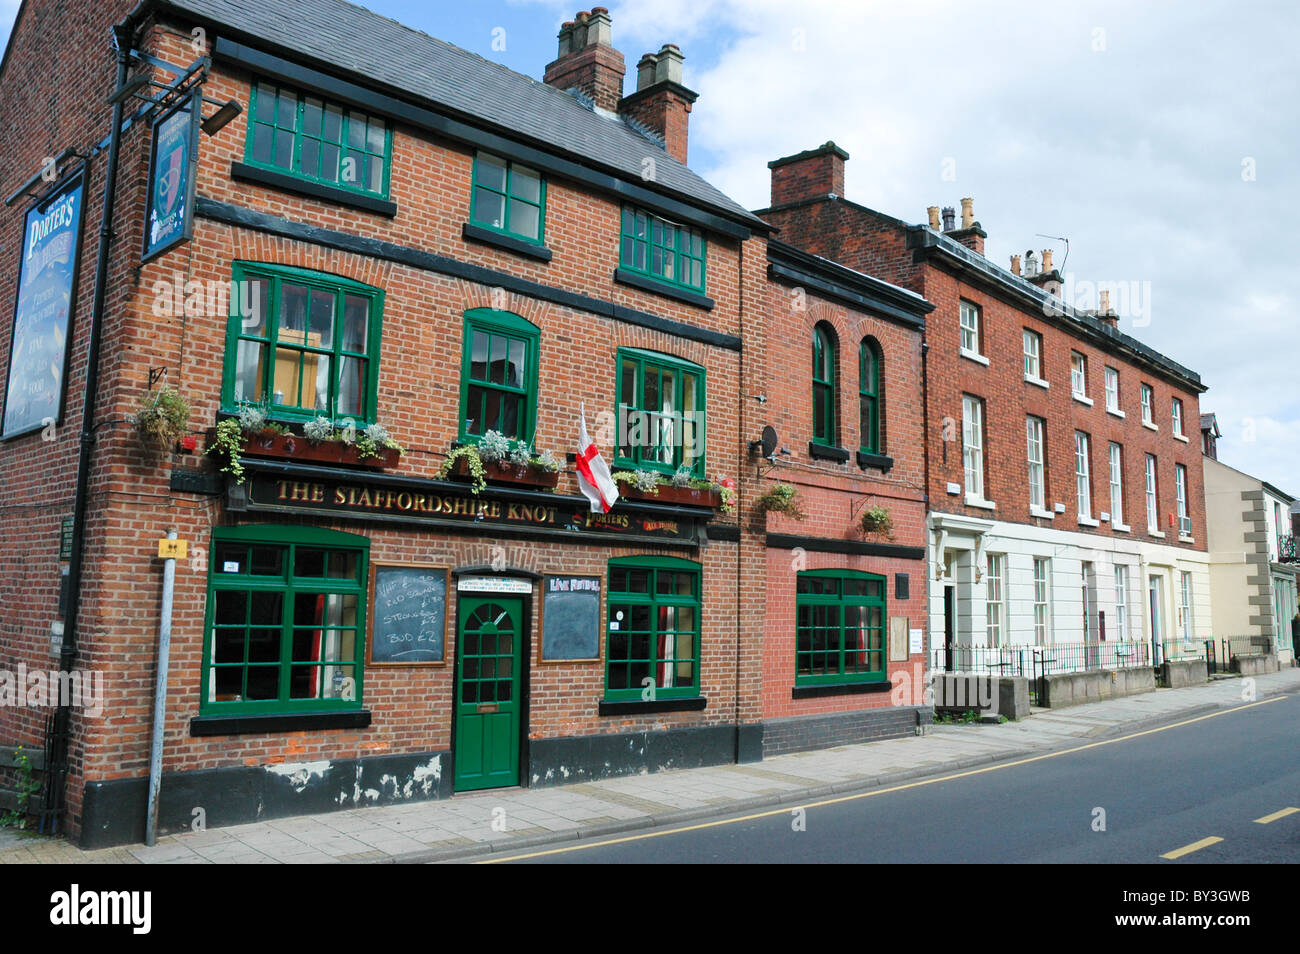 Traditional northern English pub; part of a typical small town street scene. Stock Photo